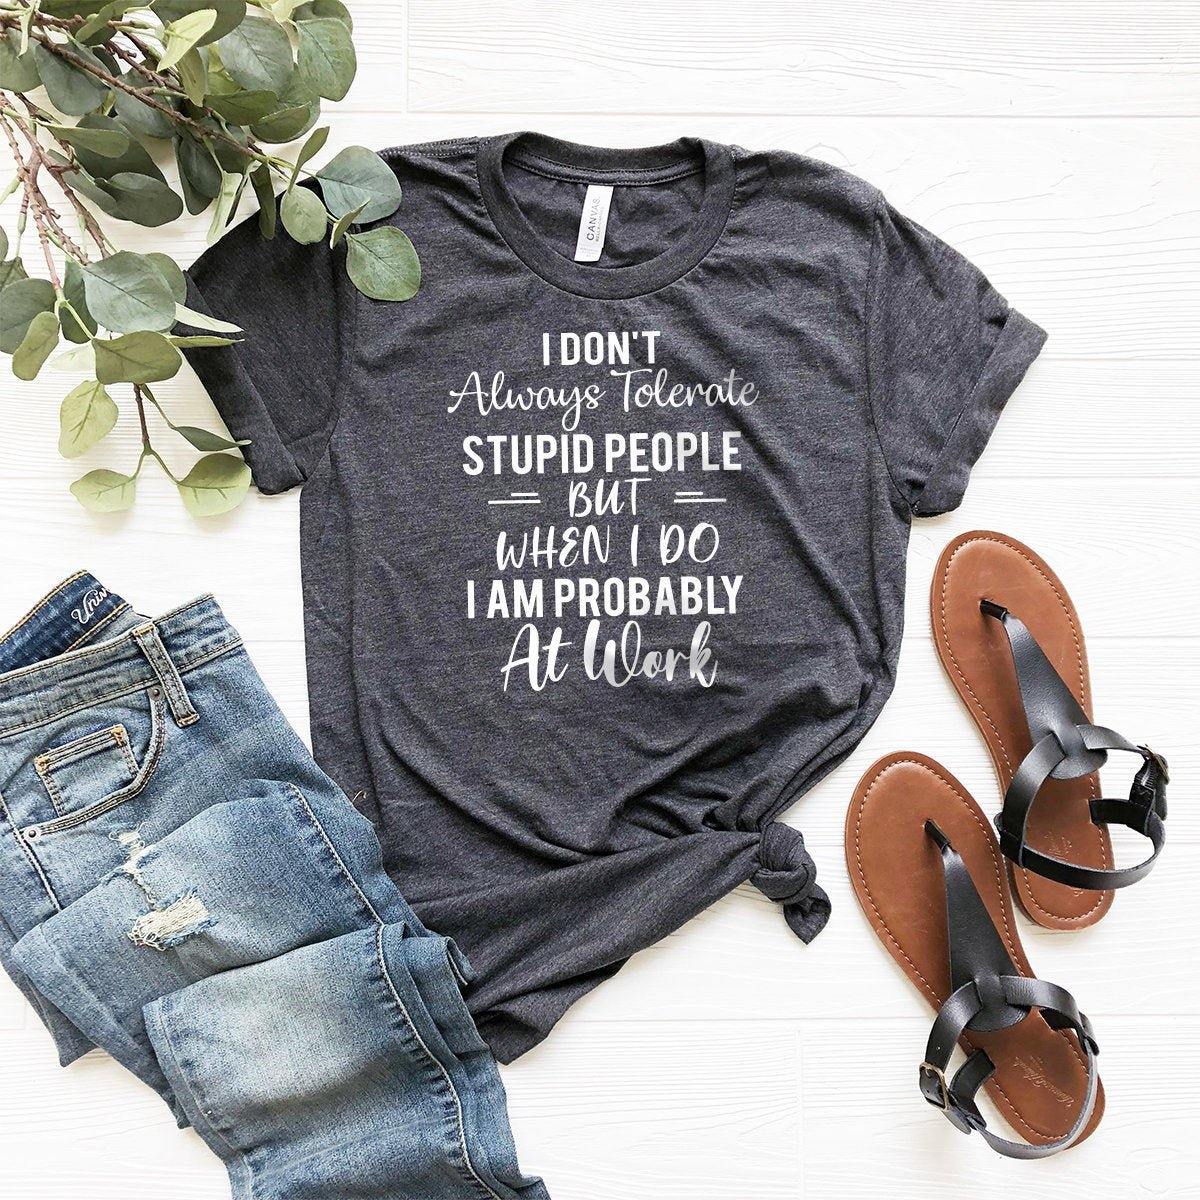 Work Shirt, I Don't Always Tolerate Stupid People But When I Do I Am Probably At Work T-Shirt, Work Hard Shirt - Fastdeliverytees.com